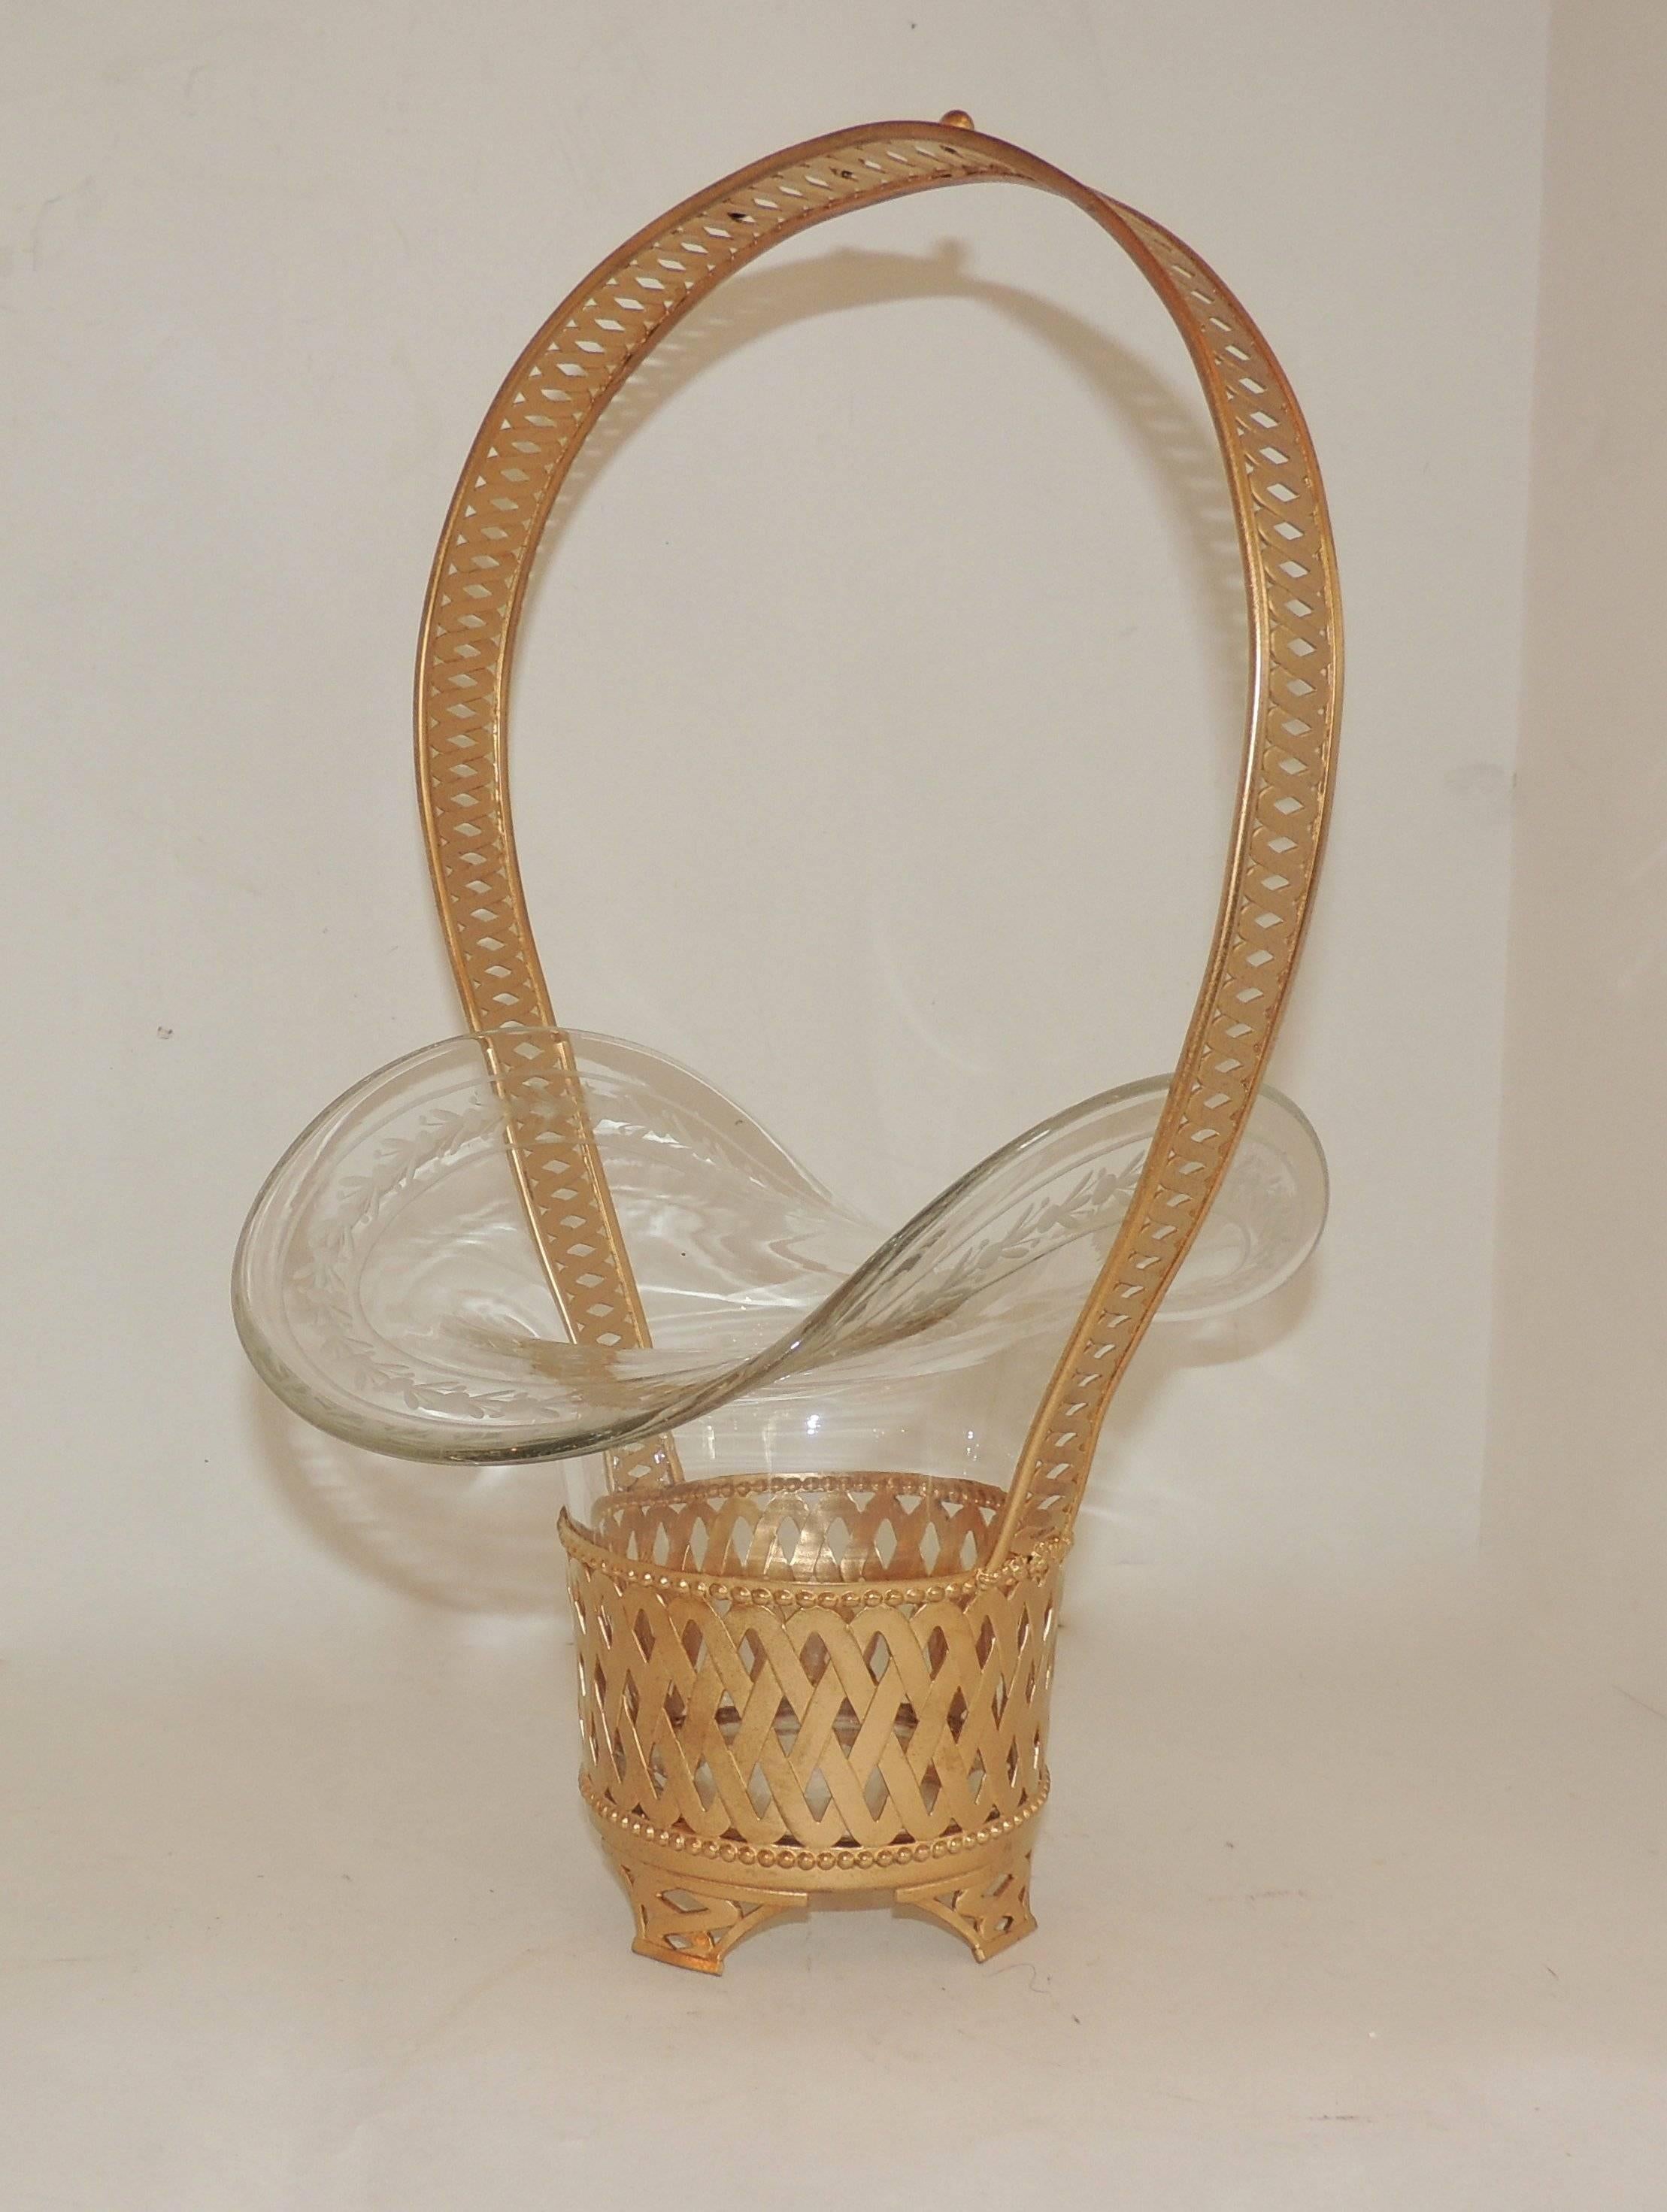 Wonderful footed basket with doré bronze basket weave pattern and large curved etched crystal glass insert. Perfect for bridal, flower girl flowers

Measures: 14" H x 9" D x 10" W.

Insert: 6.5" D x 10" W x 6.5" H.